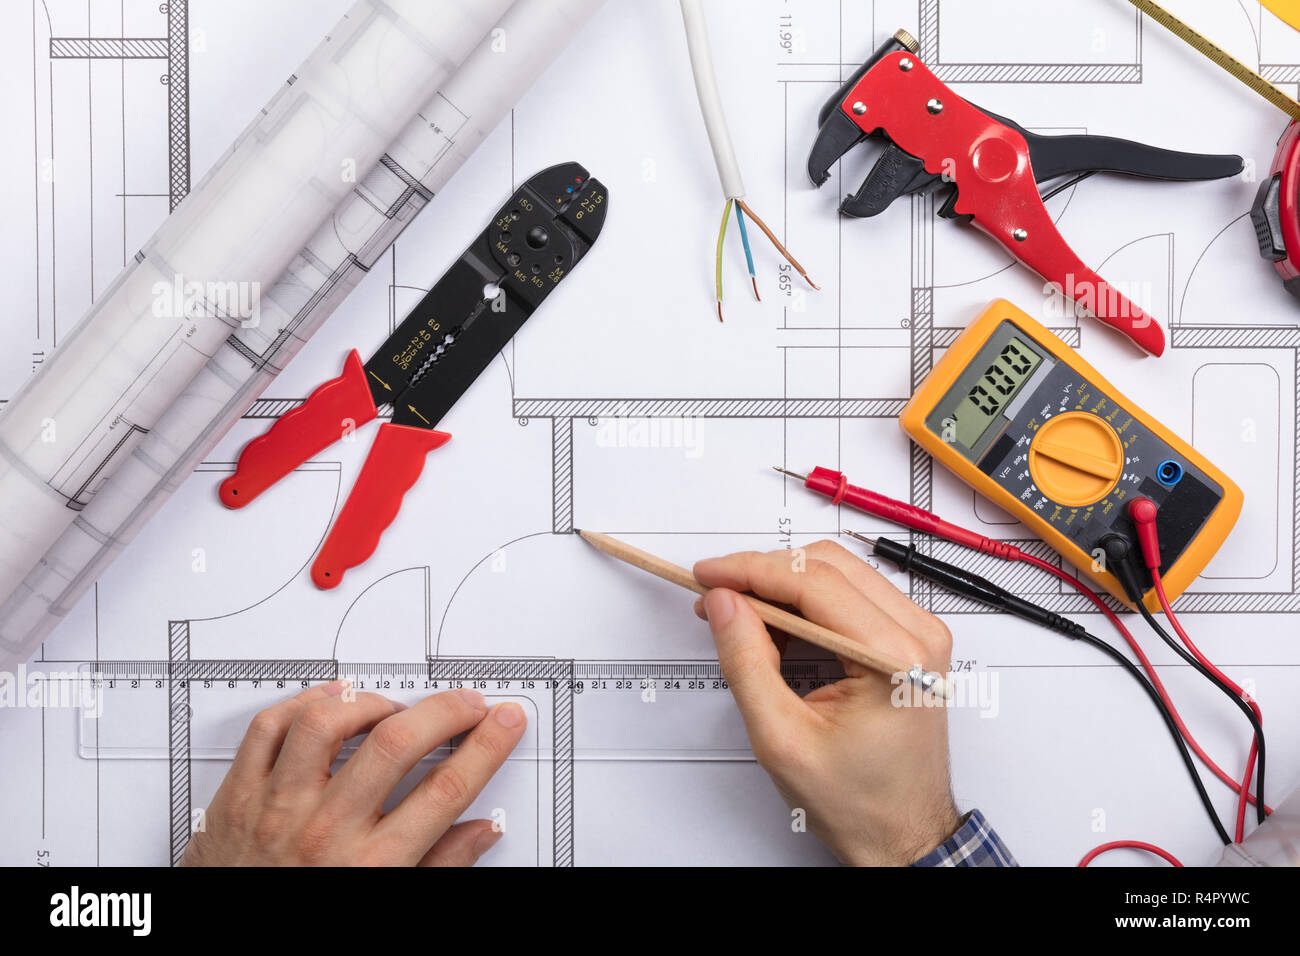 Architect Drawing Plan On Blueprint With Electrical Components Stock Photo